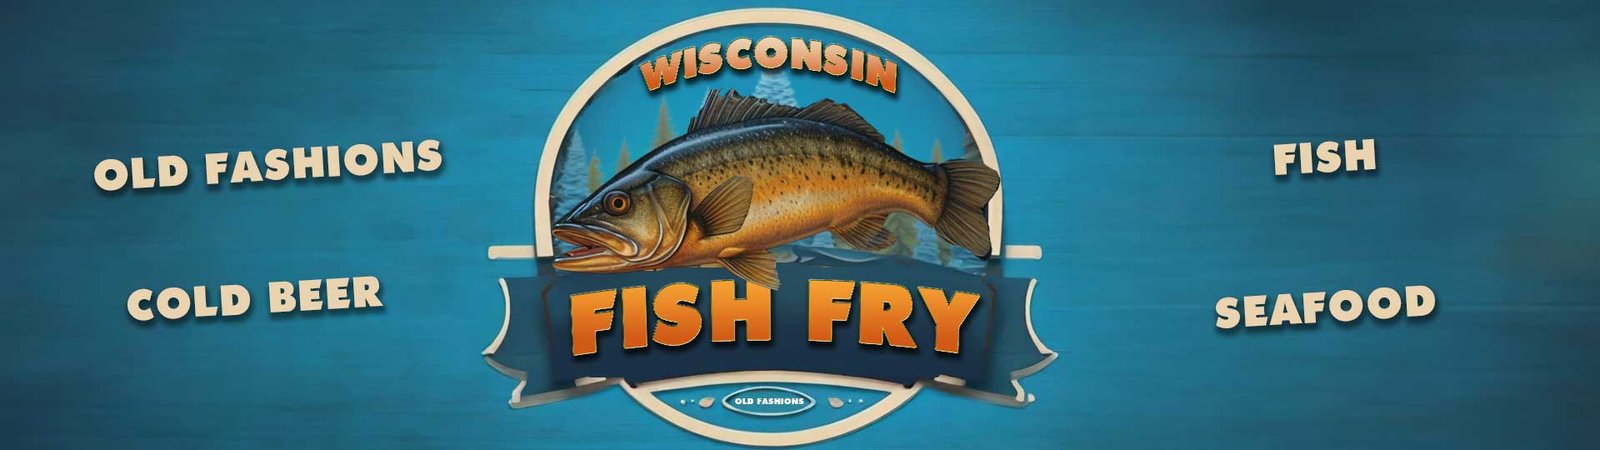 Wisconsin Friday Fish Fry banner